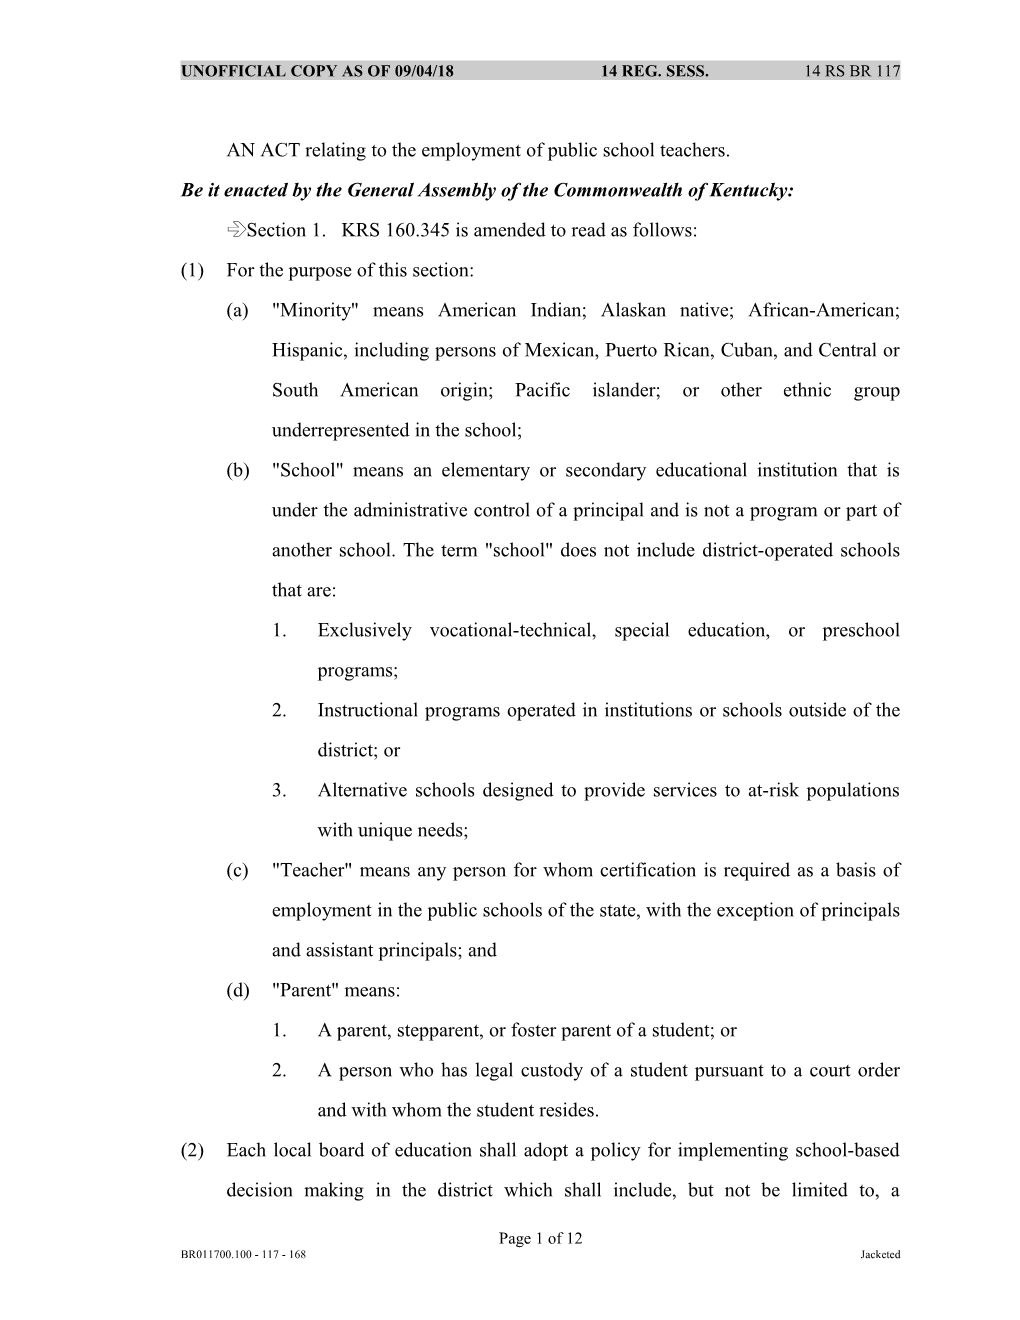 AN ACT Relating to the Employment of Public School Teachers